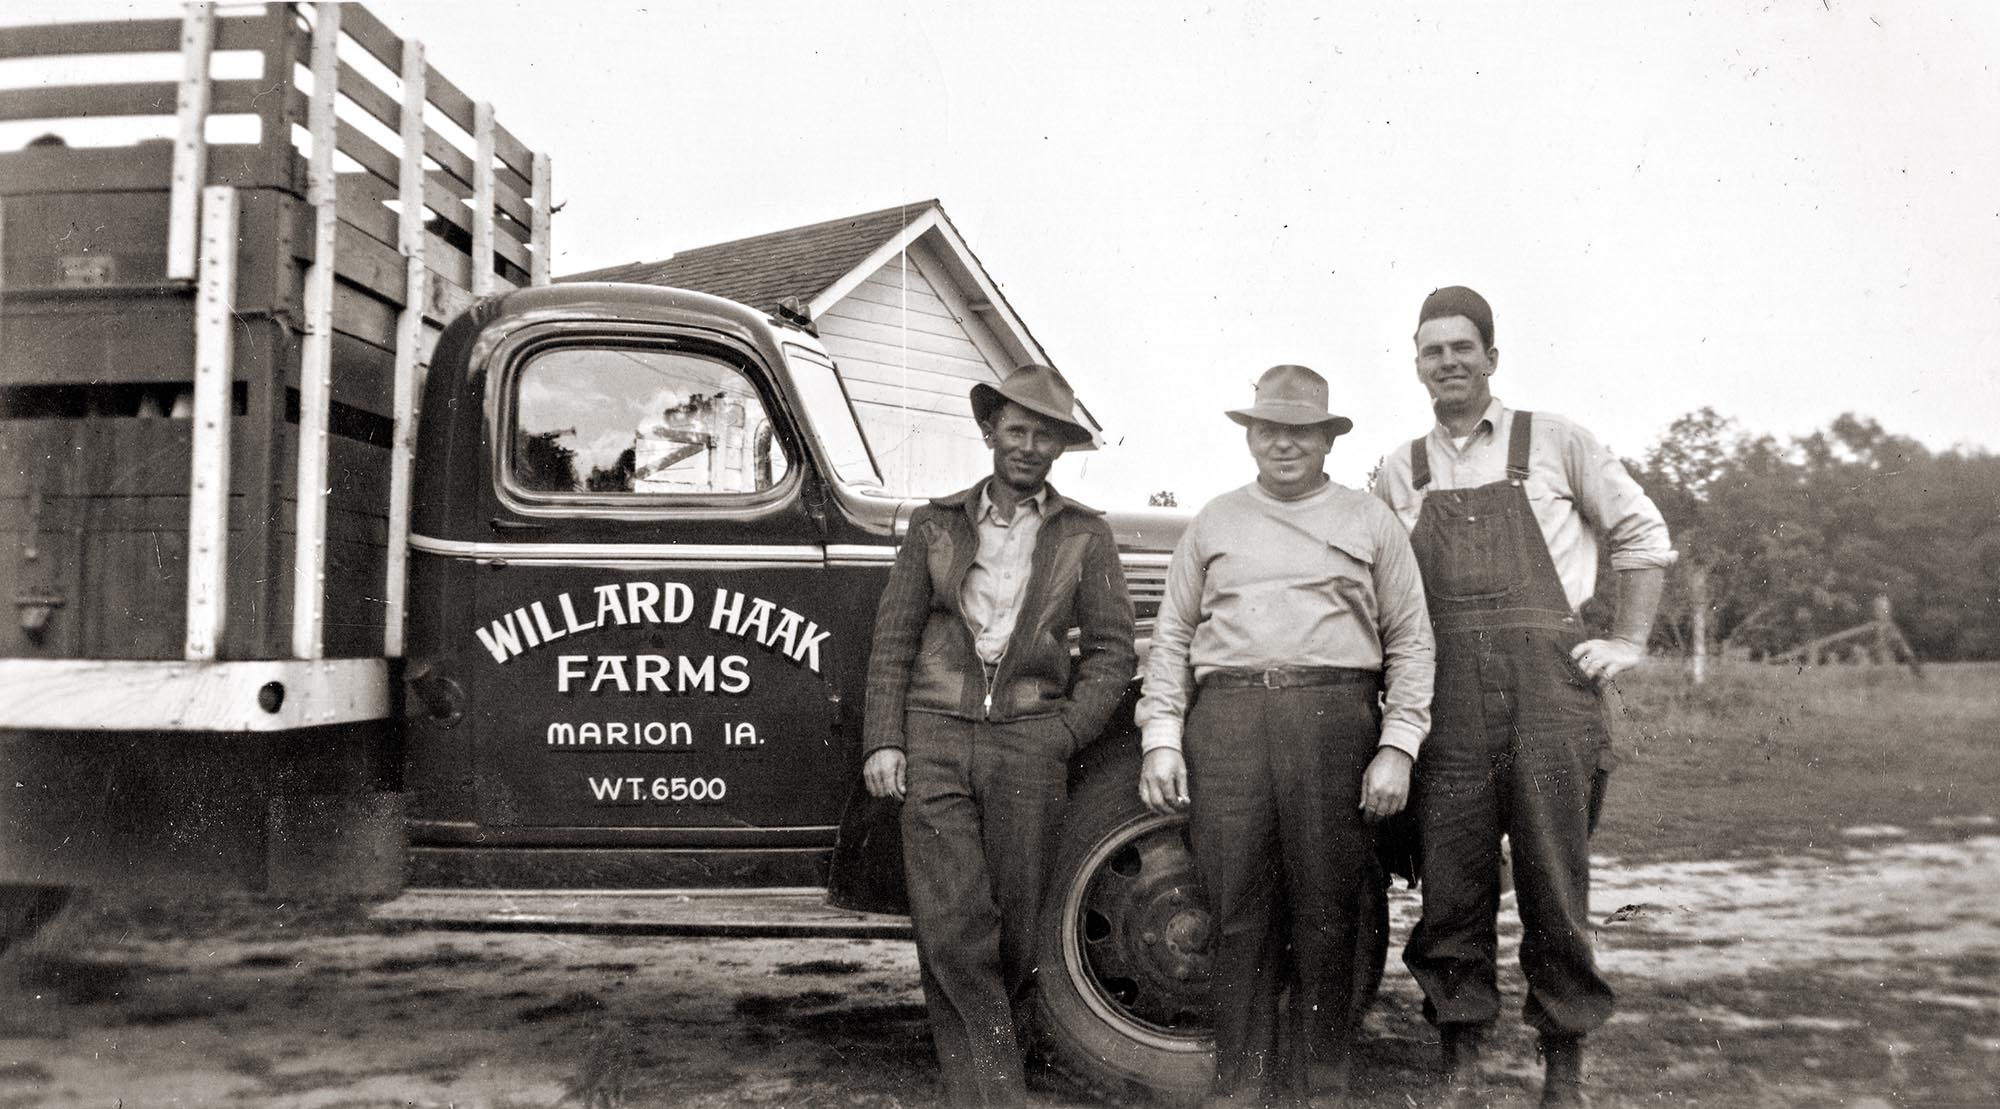 The Willard S. Haak Cattle and Dairy Farms, Marion, Iowa, between 1937 and 1943. They were a Dutch Girl brand milk producer. Dutch Girl was sold in the midwest and at Leibsohn Grocery, in Marion, Iowa.